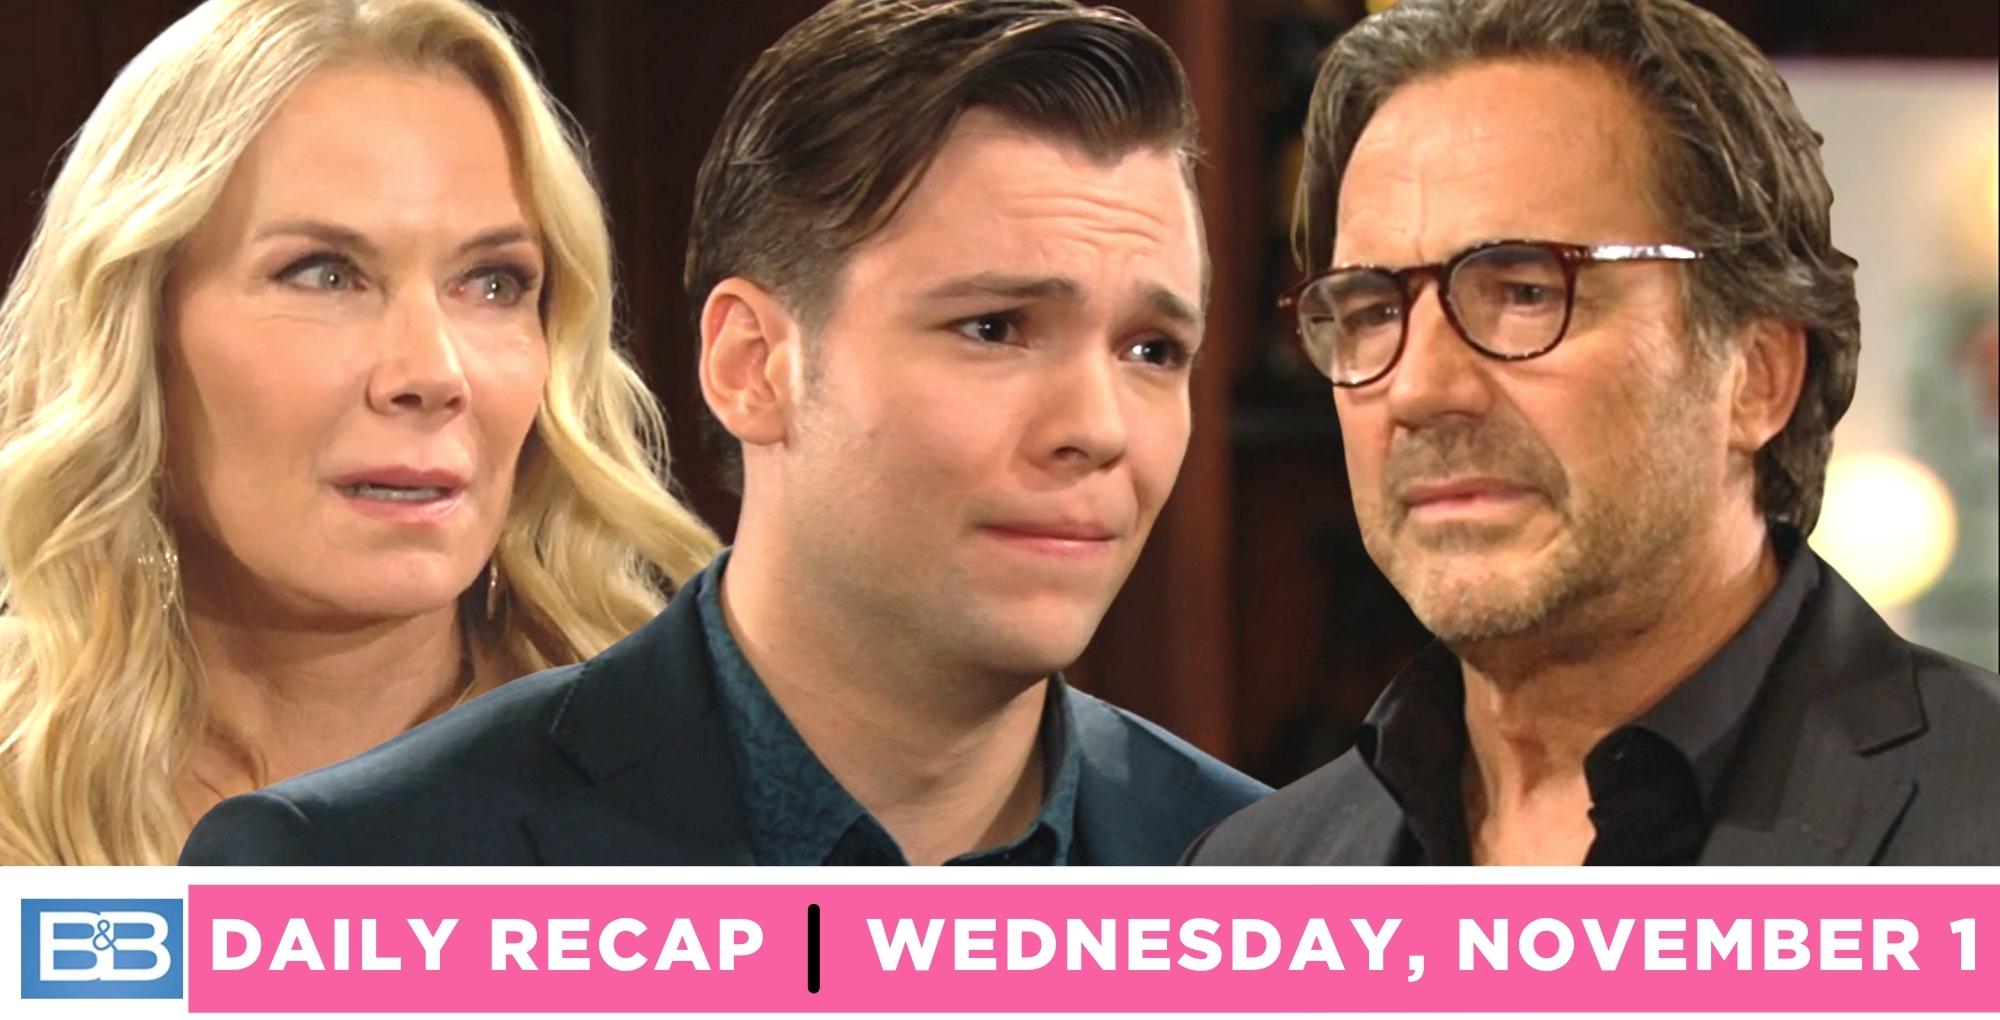 the bold and the beautiful recap for wednesday, november 1, 2023, brooke, rj, and ridge.